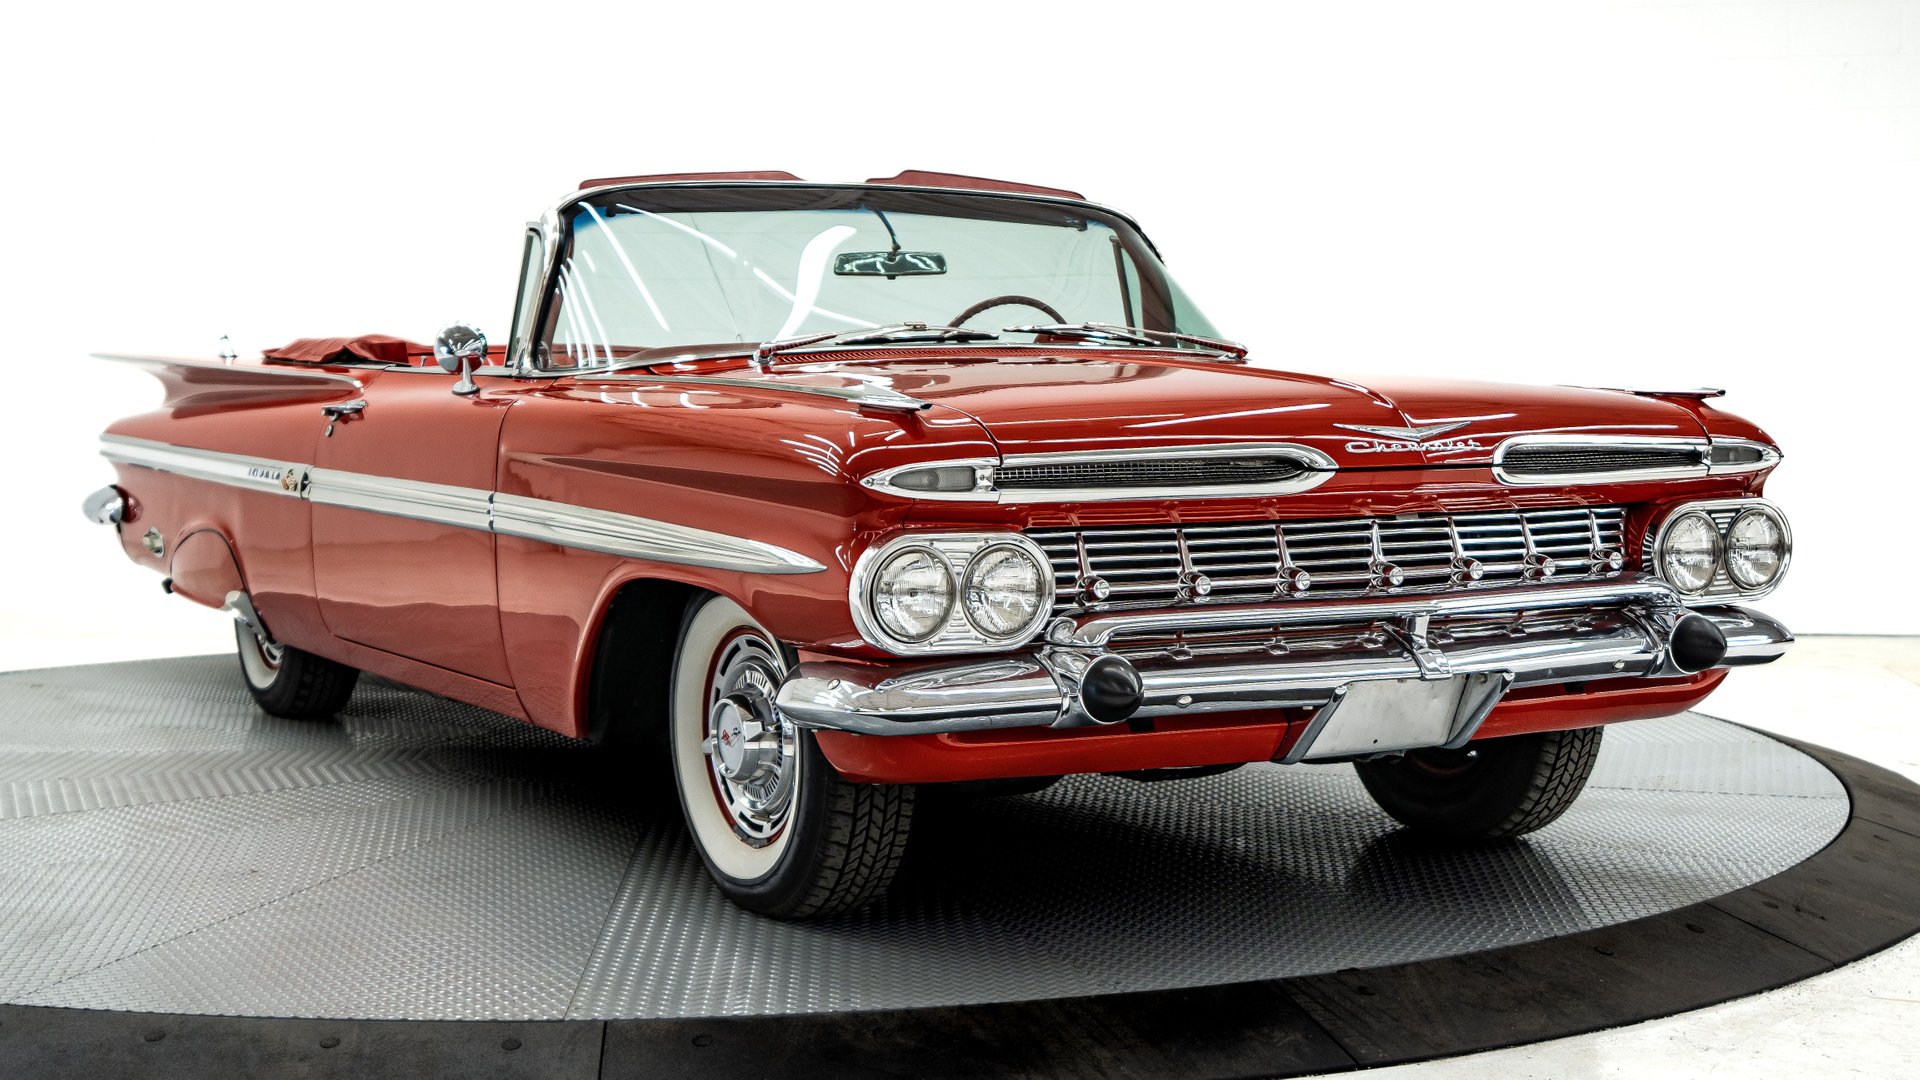 1959 Chevrolet Impala Convertible Crown Classics Buy And Sell Classic Cars And Trucks In Ca